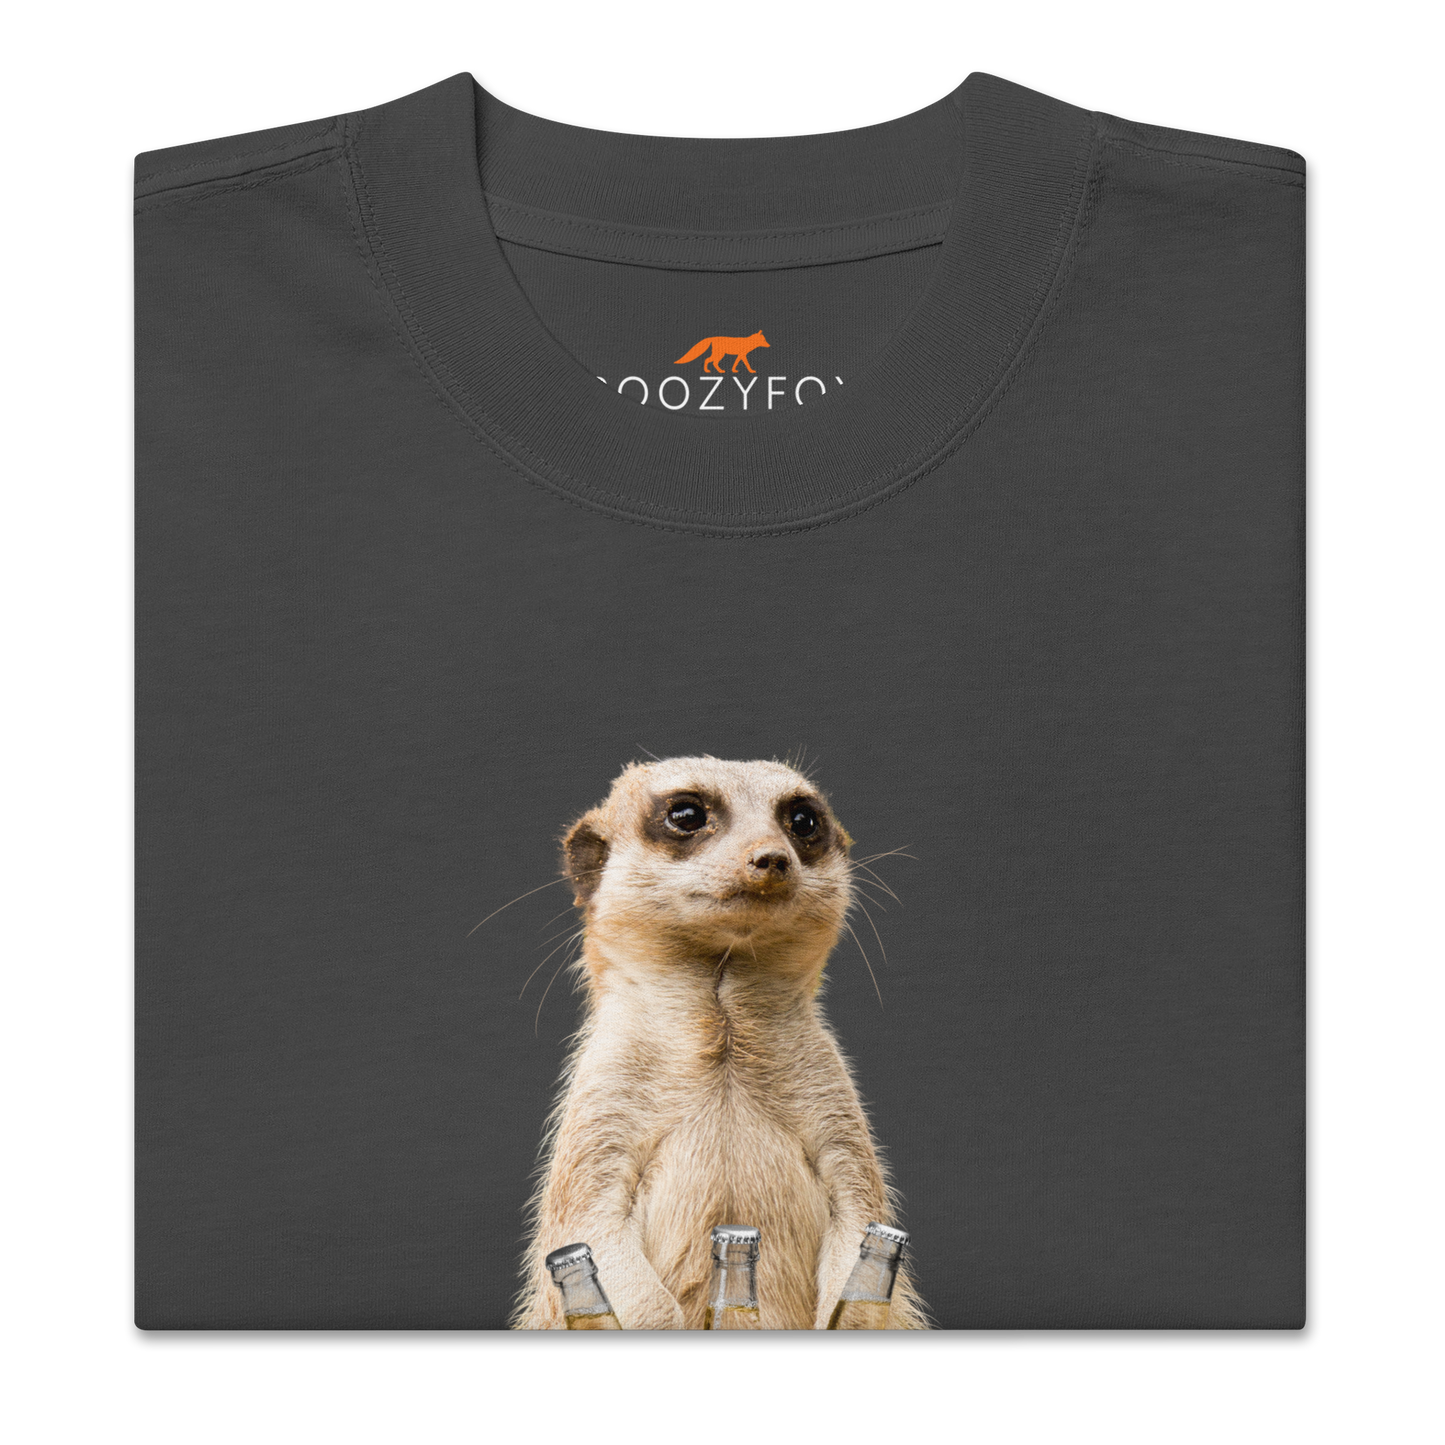 Product details of a Faded Black Meerkat Oversized T-Shirt featuring a hilarious Beerkat graphic on the chest - Funny Graphic Meerkat Oversized Tees - Boozy Fox